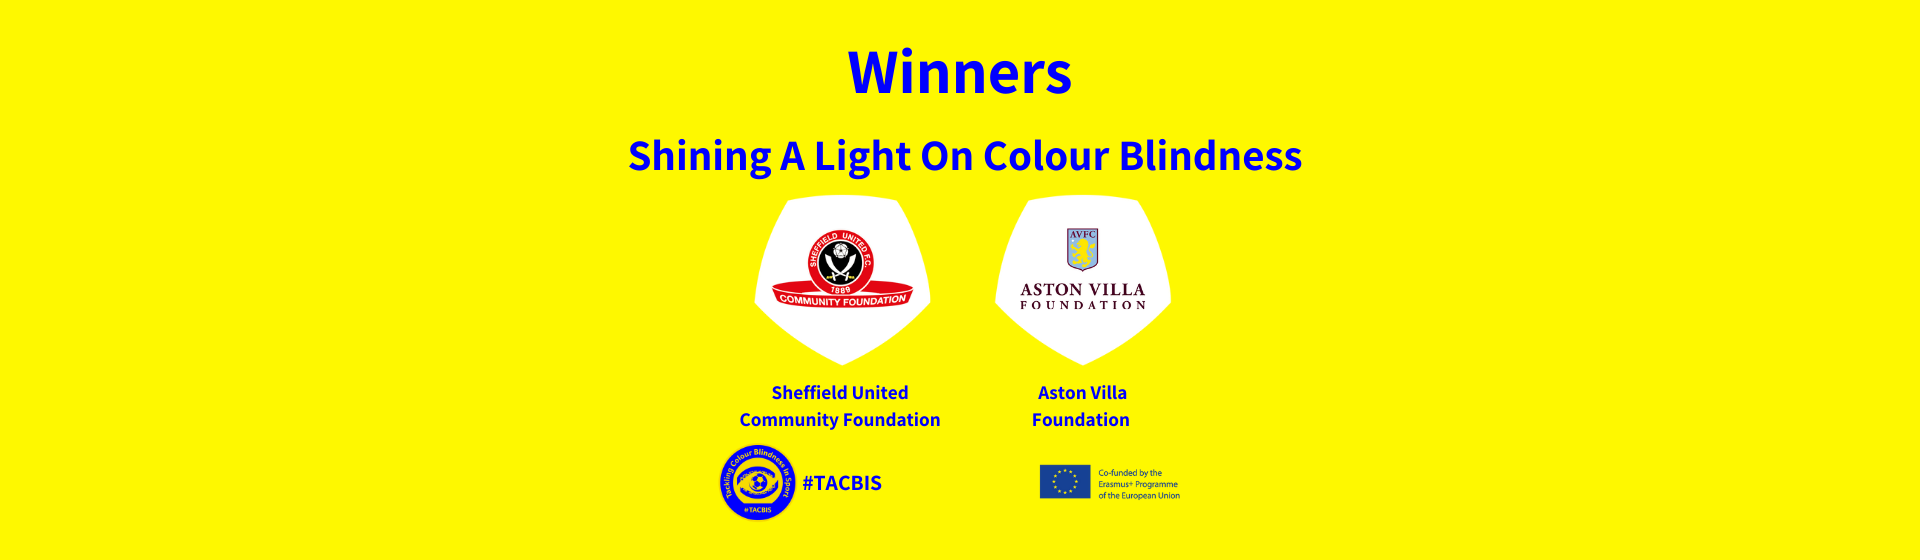 Aston Villa and Sheffield United winners of drawing competition header